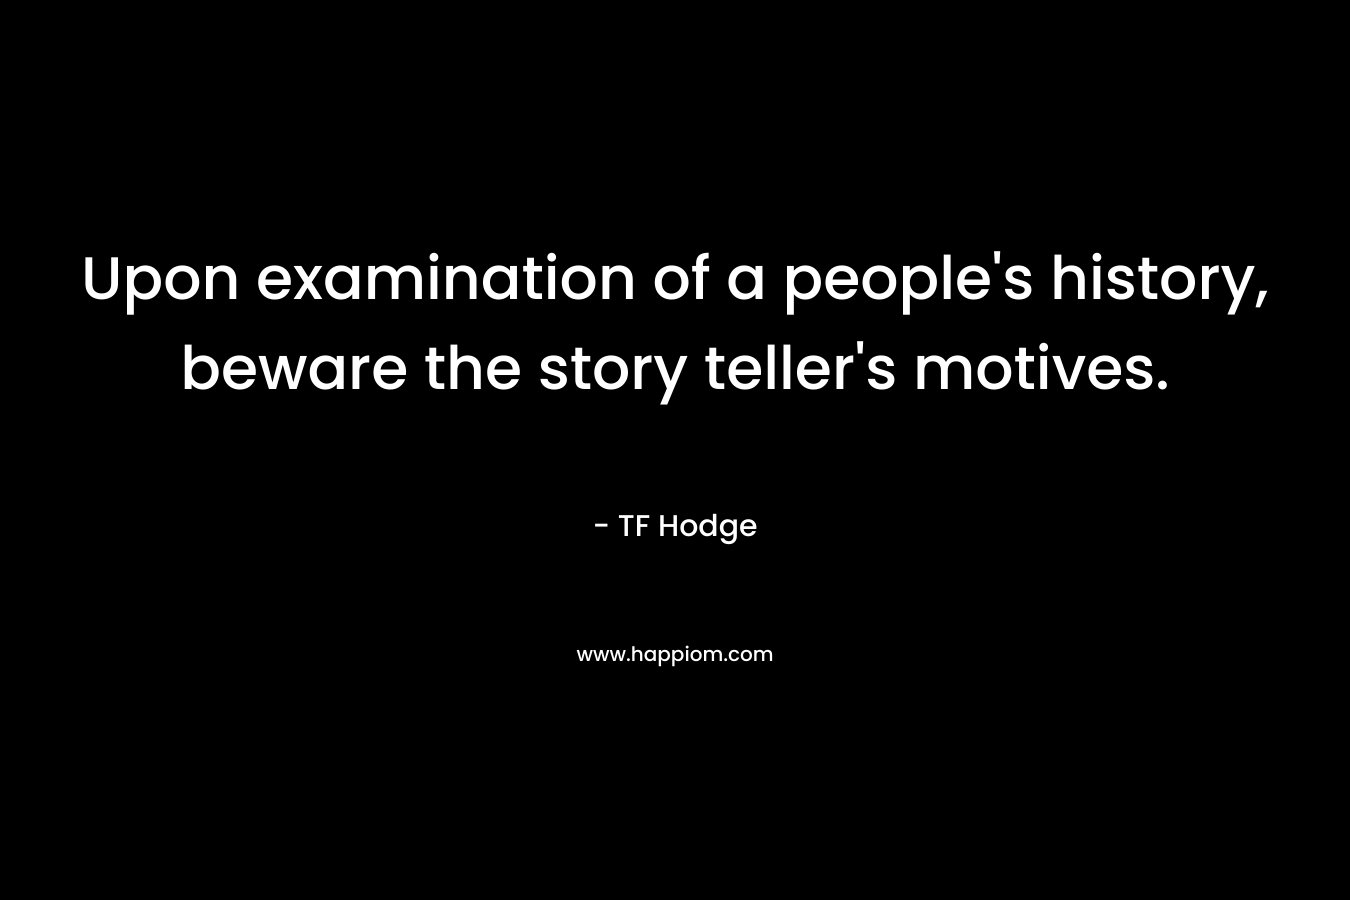 Upon examination of a people’s history, beware the story teller’s motives. – TF Hodge